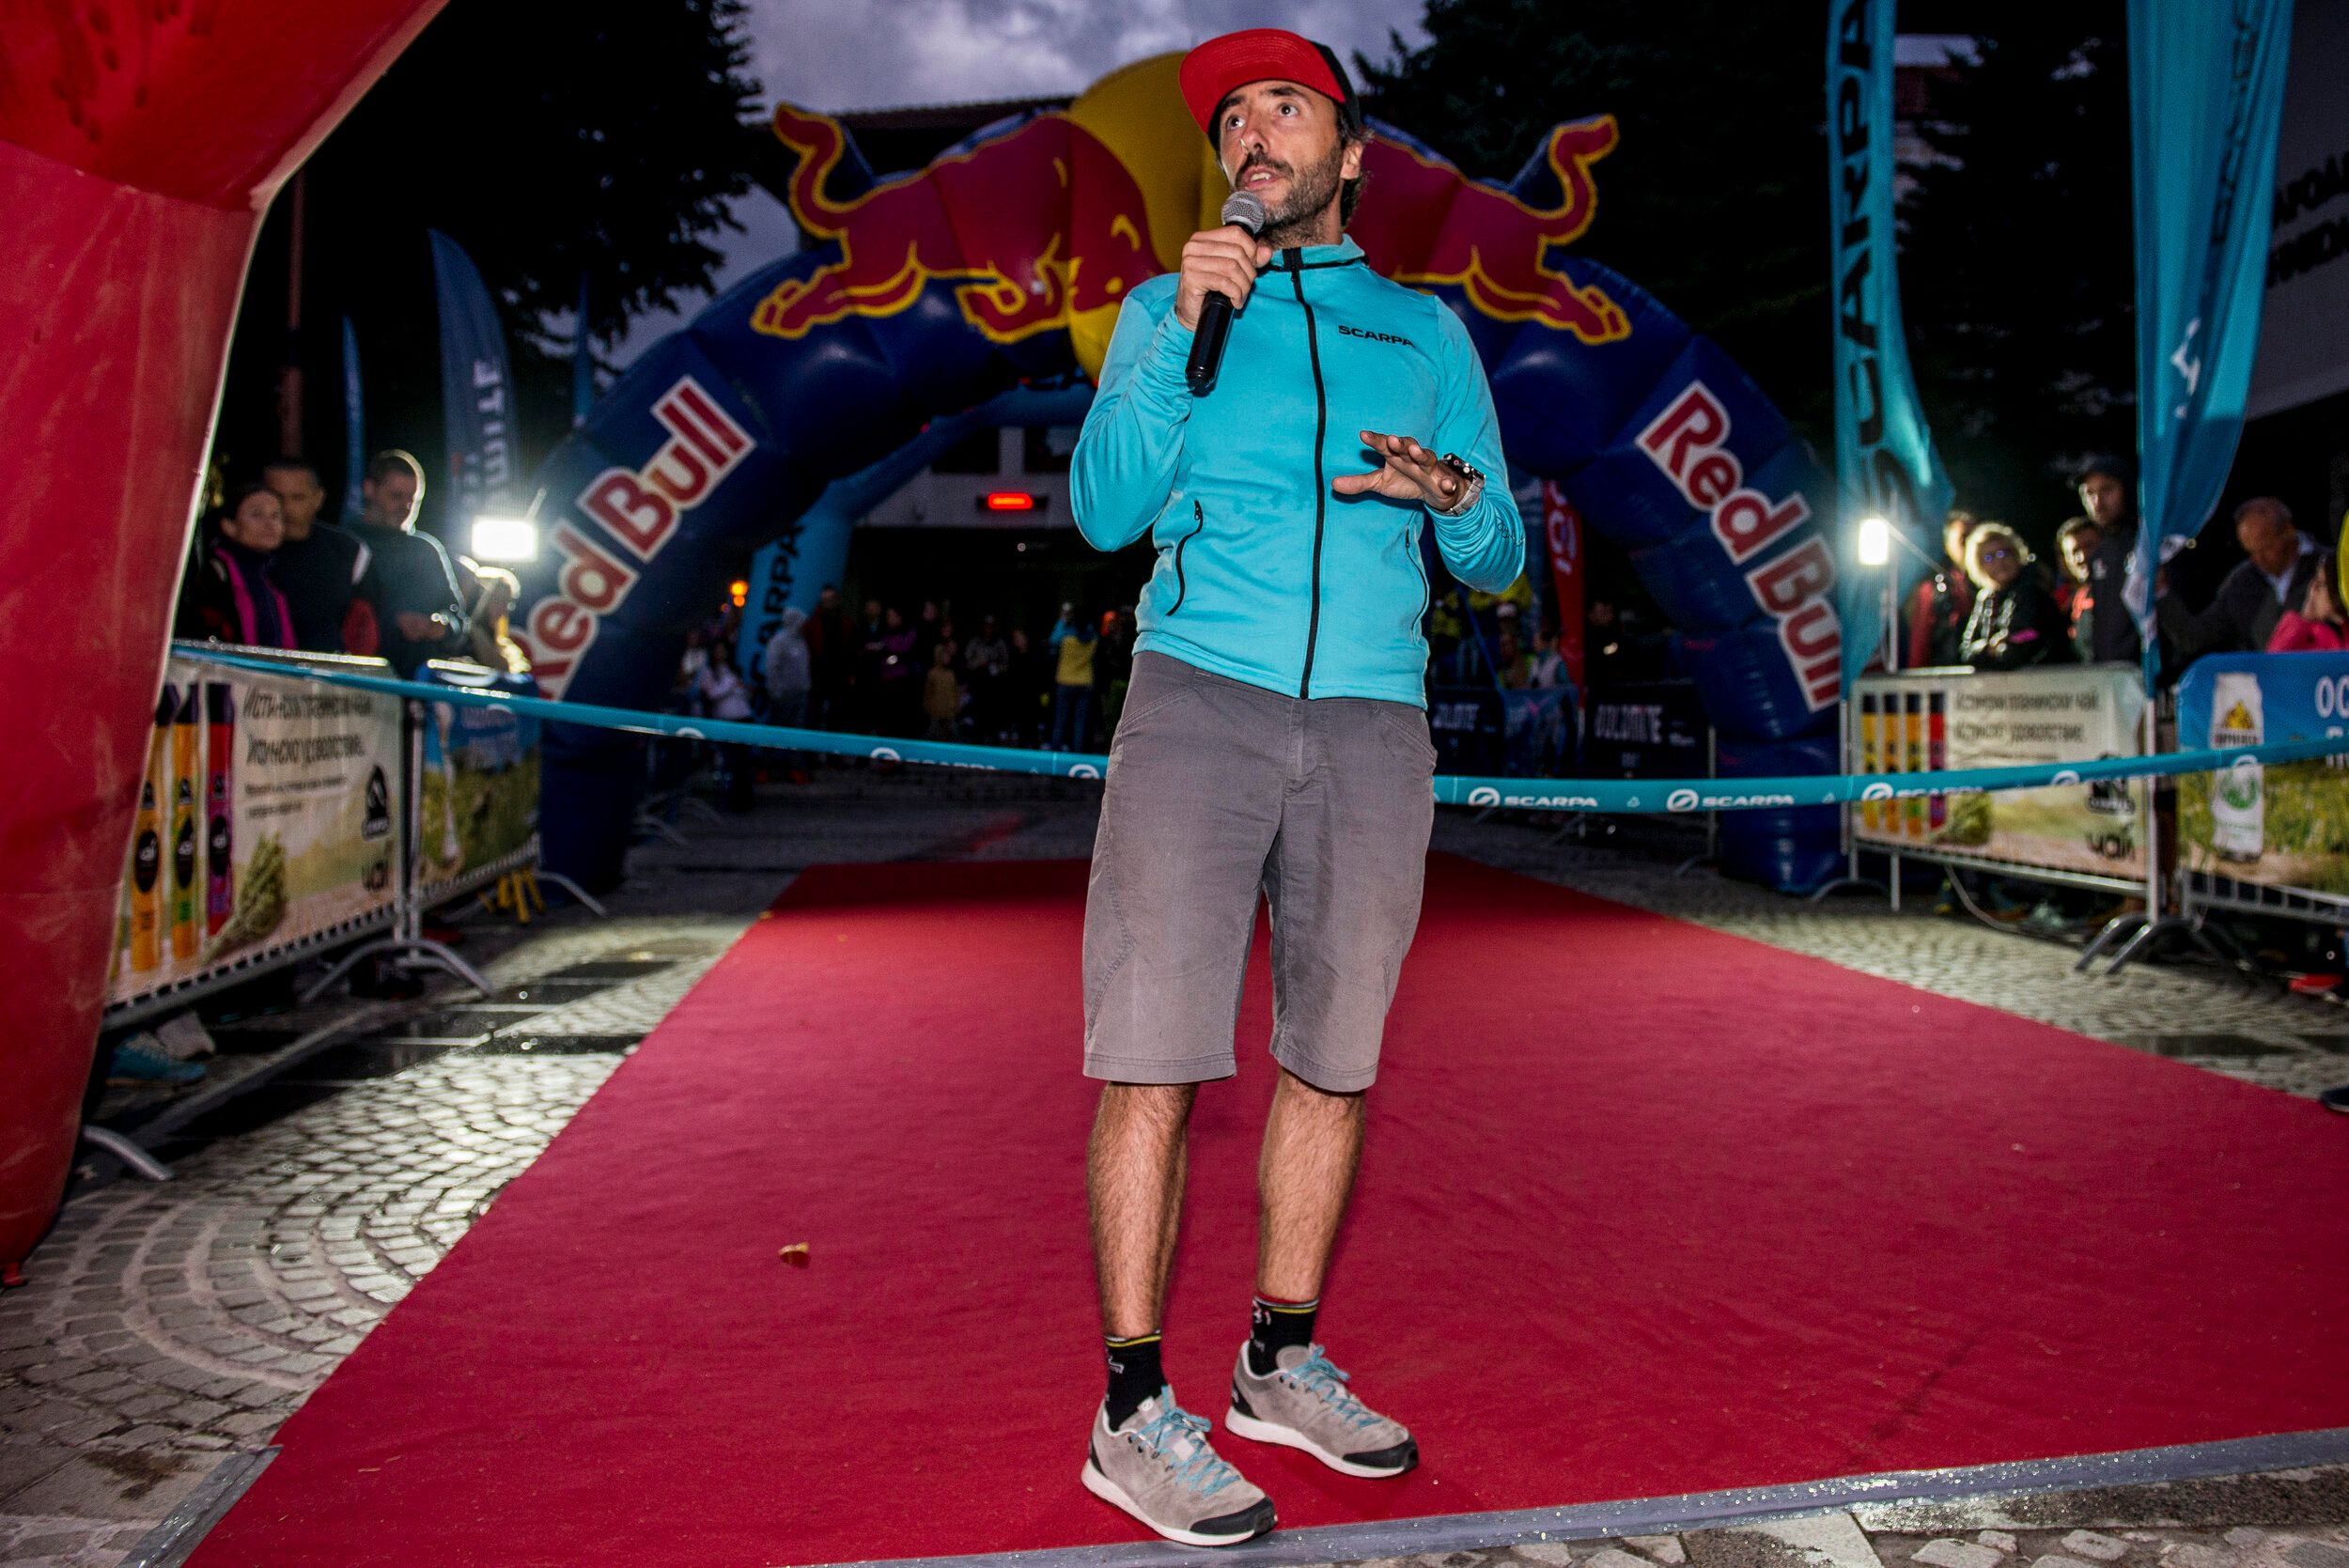 Dimitar Dimitrov, founder of XCoSports and Race Director for the Pirin Ultra & Pirin Extreme 38k Skyrace.